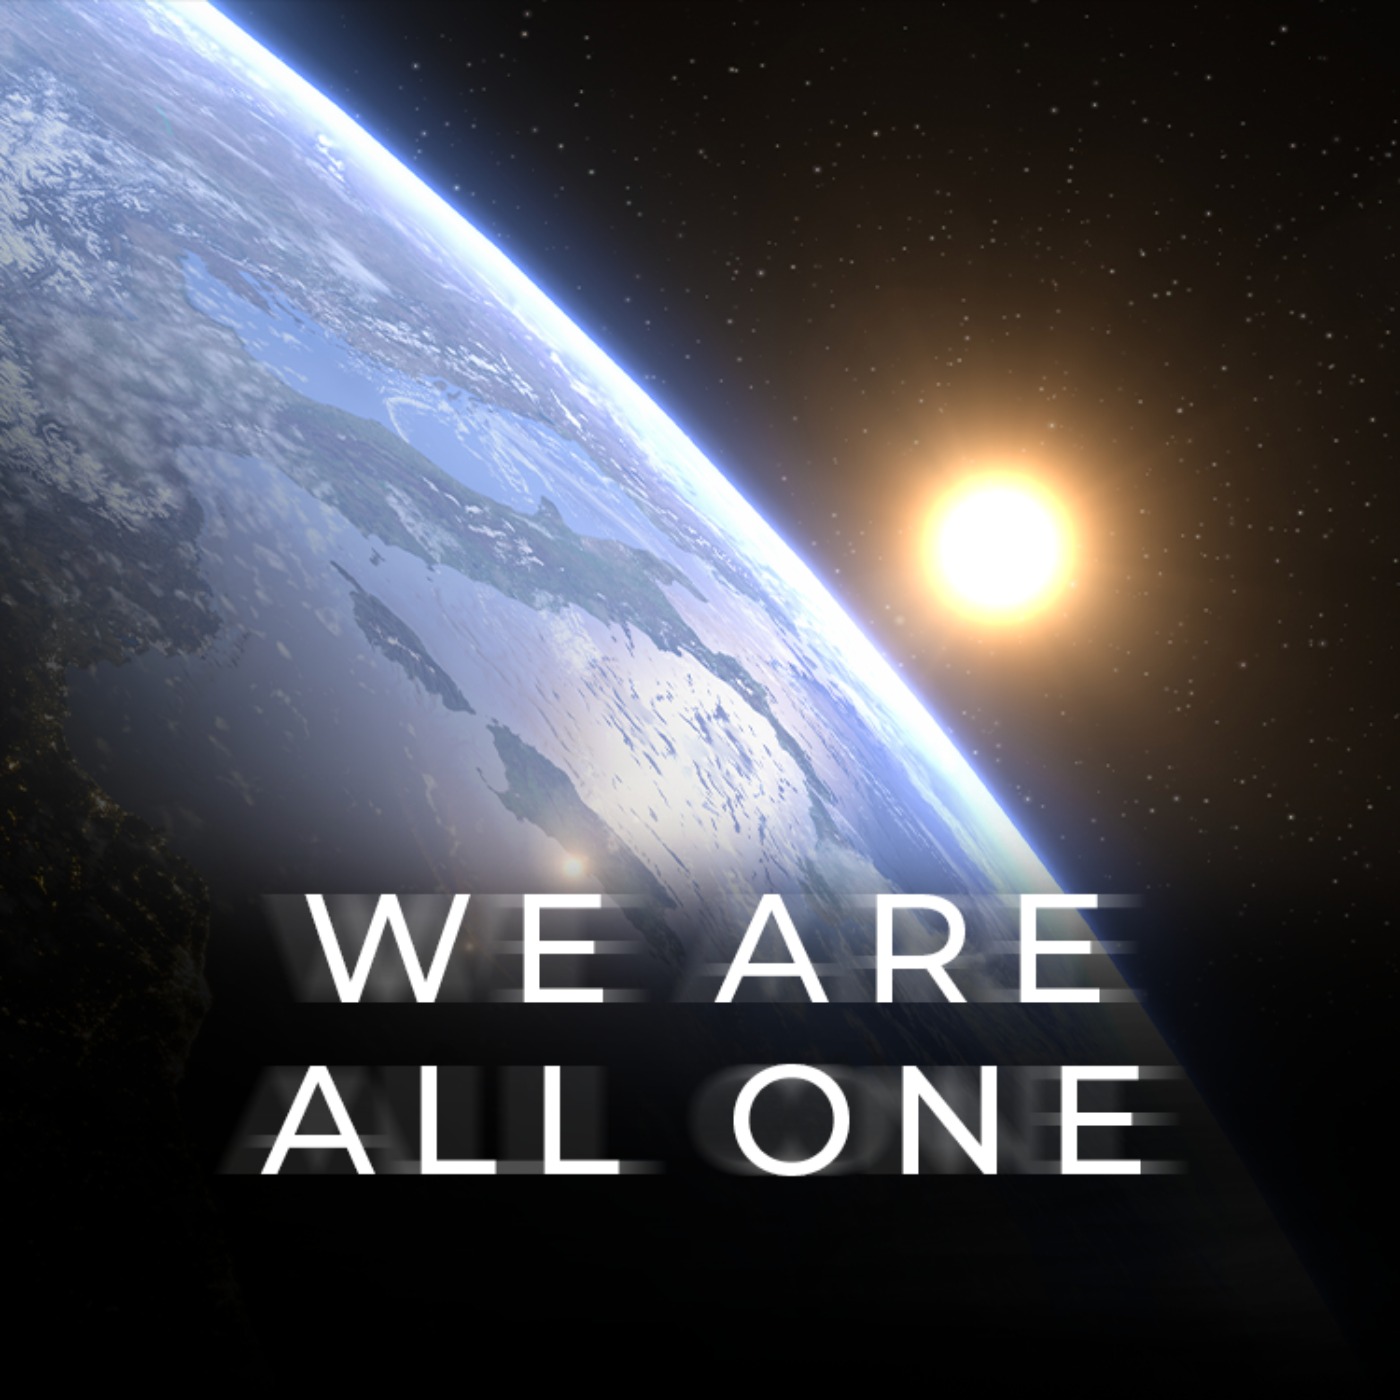 It's Time to Wake Up - We Are All One